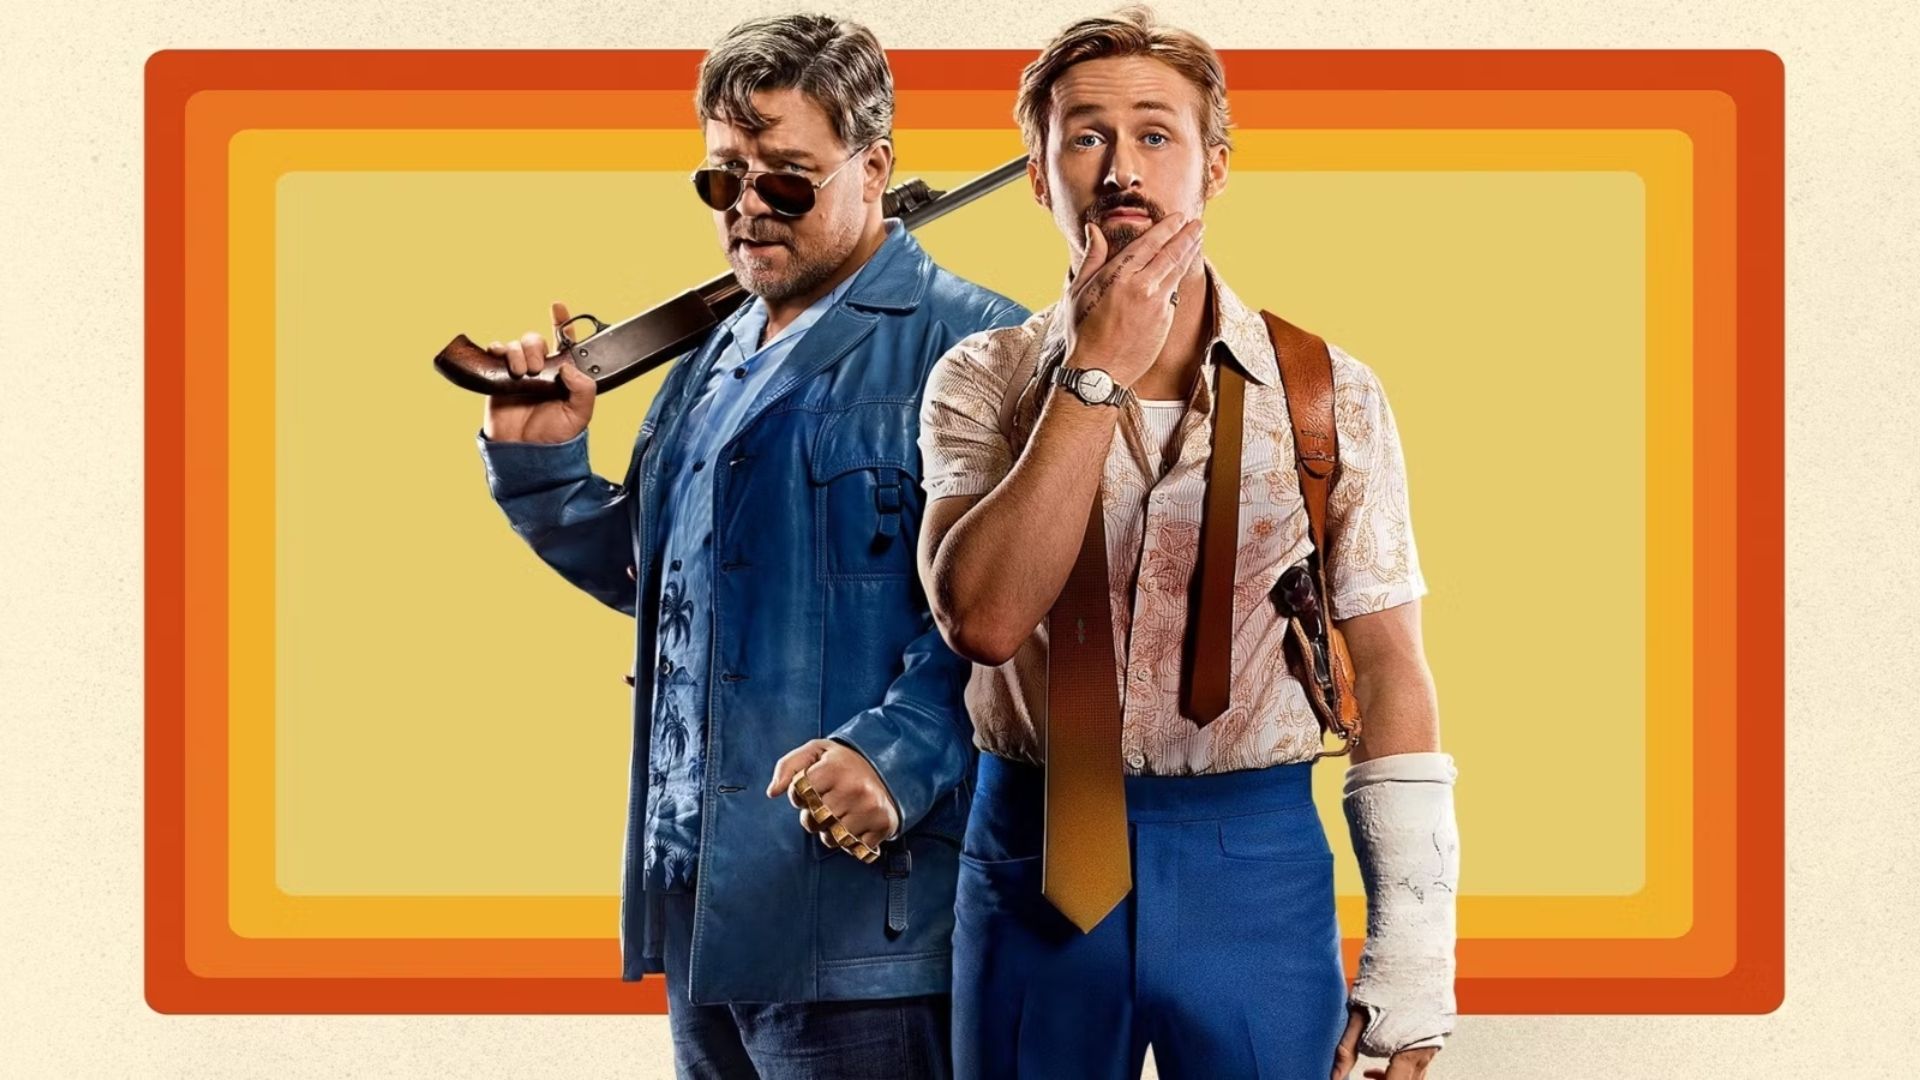 Russell Crowe as Jackson Healy and Ryan Gosling as Holland March in a promotional poster for The Nice Guys